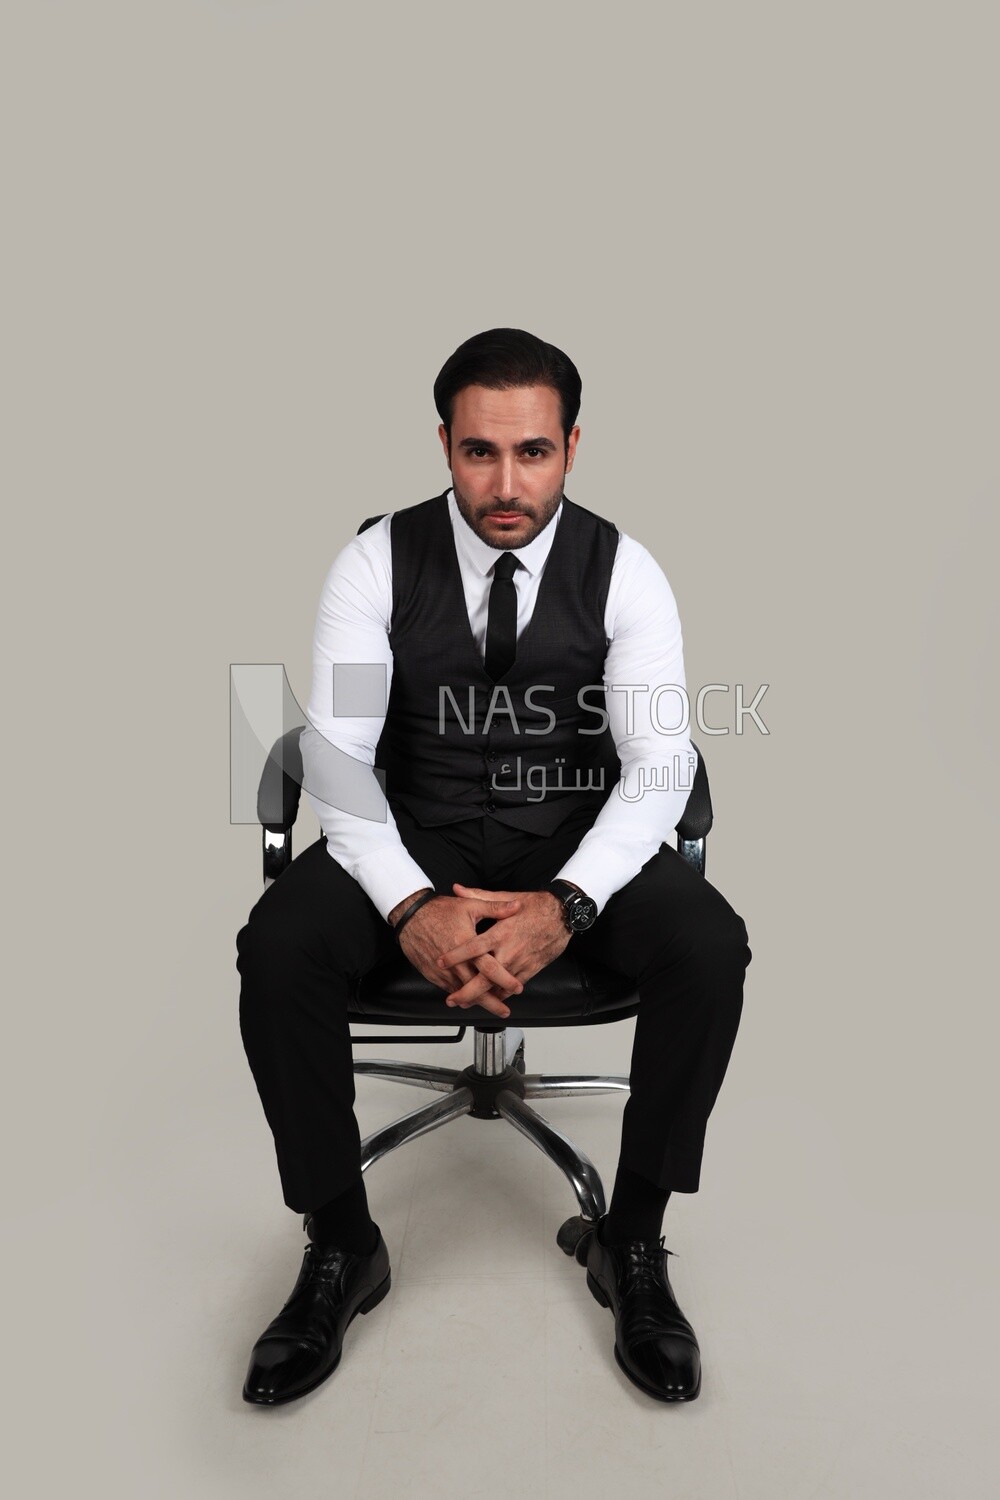 Photo of a businessman with a formal suit sitting on a chair and looking at the camera, business development and partnerships, business meeting, Model